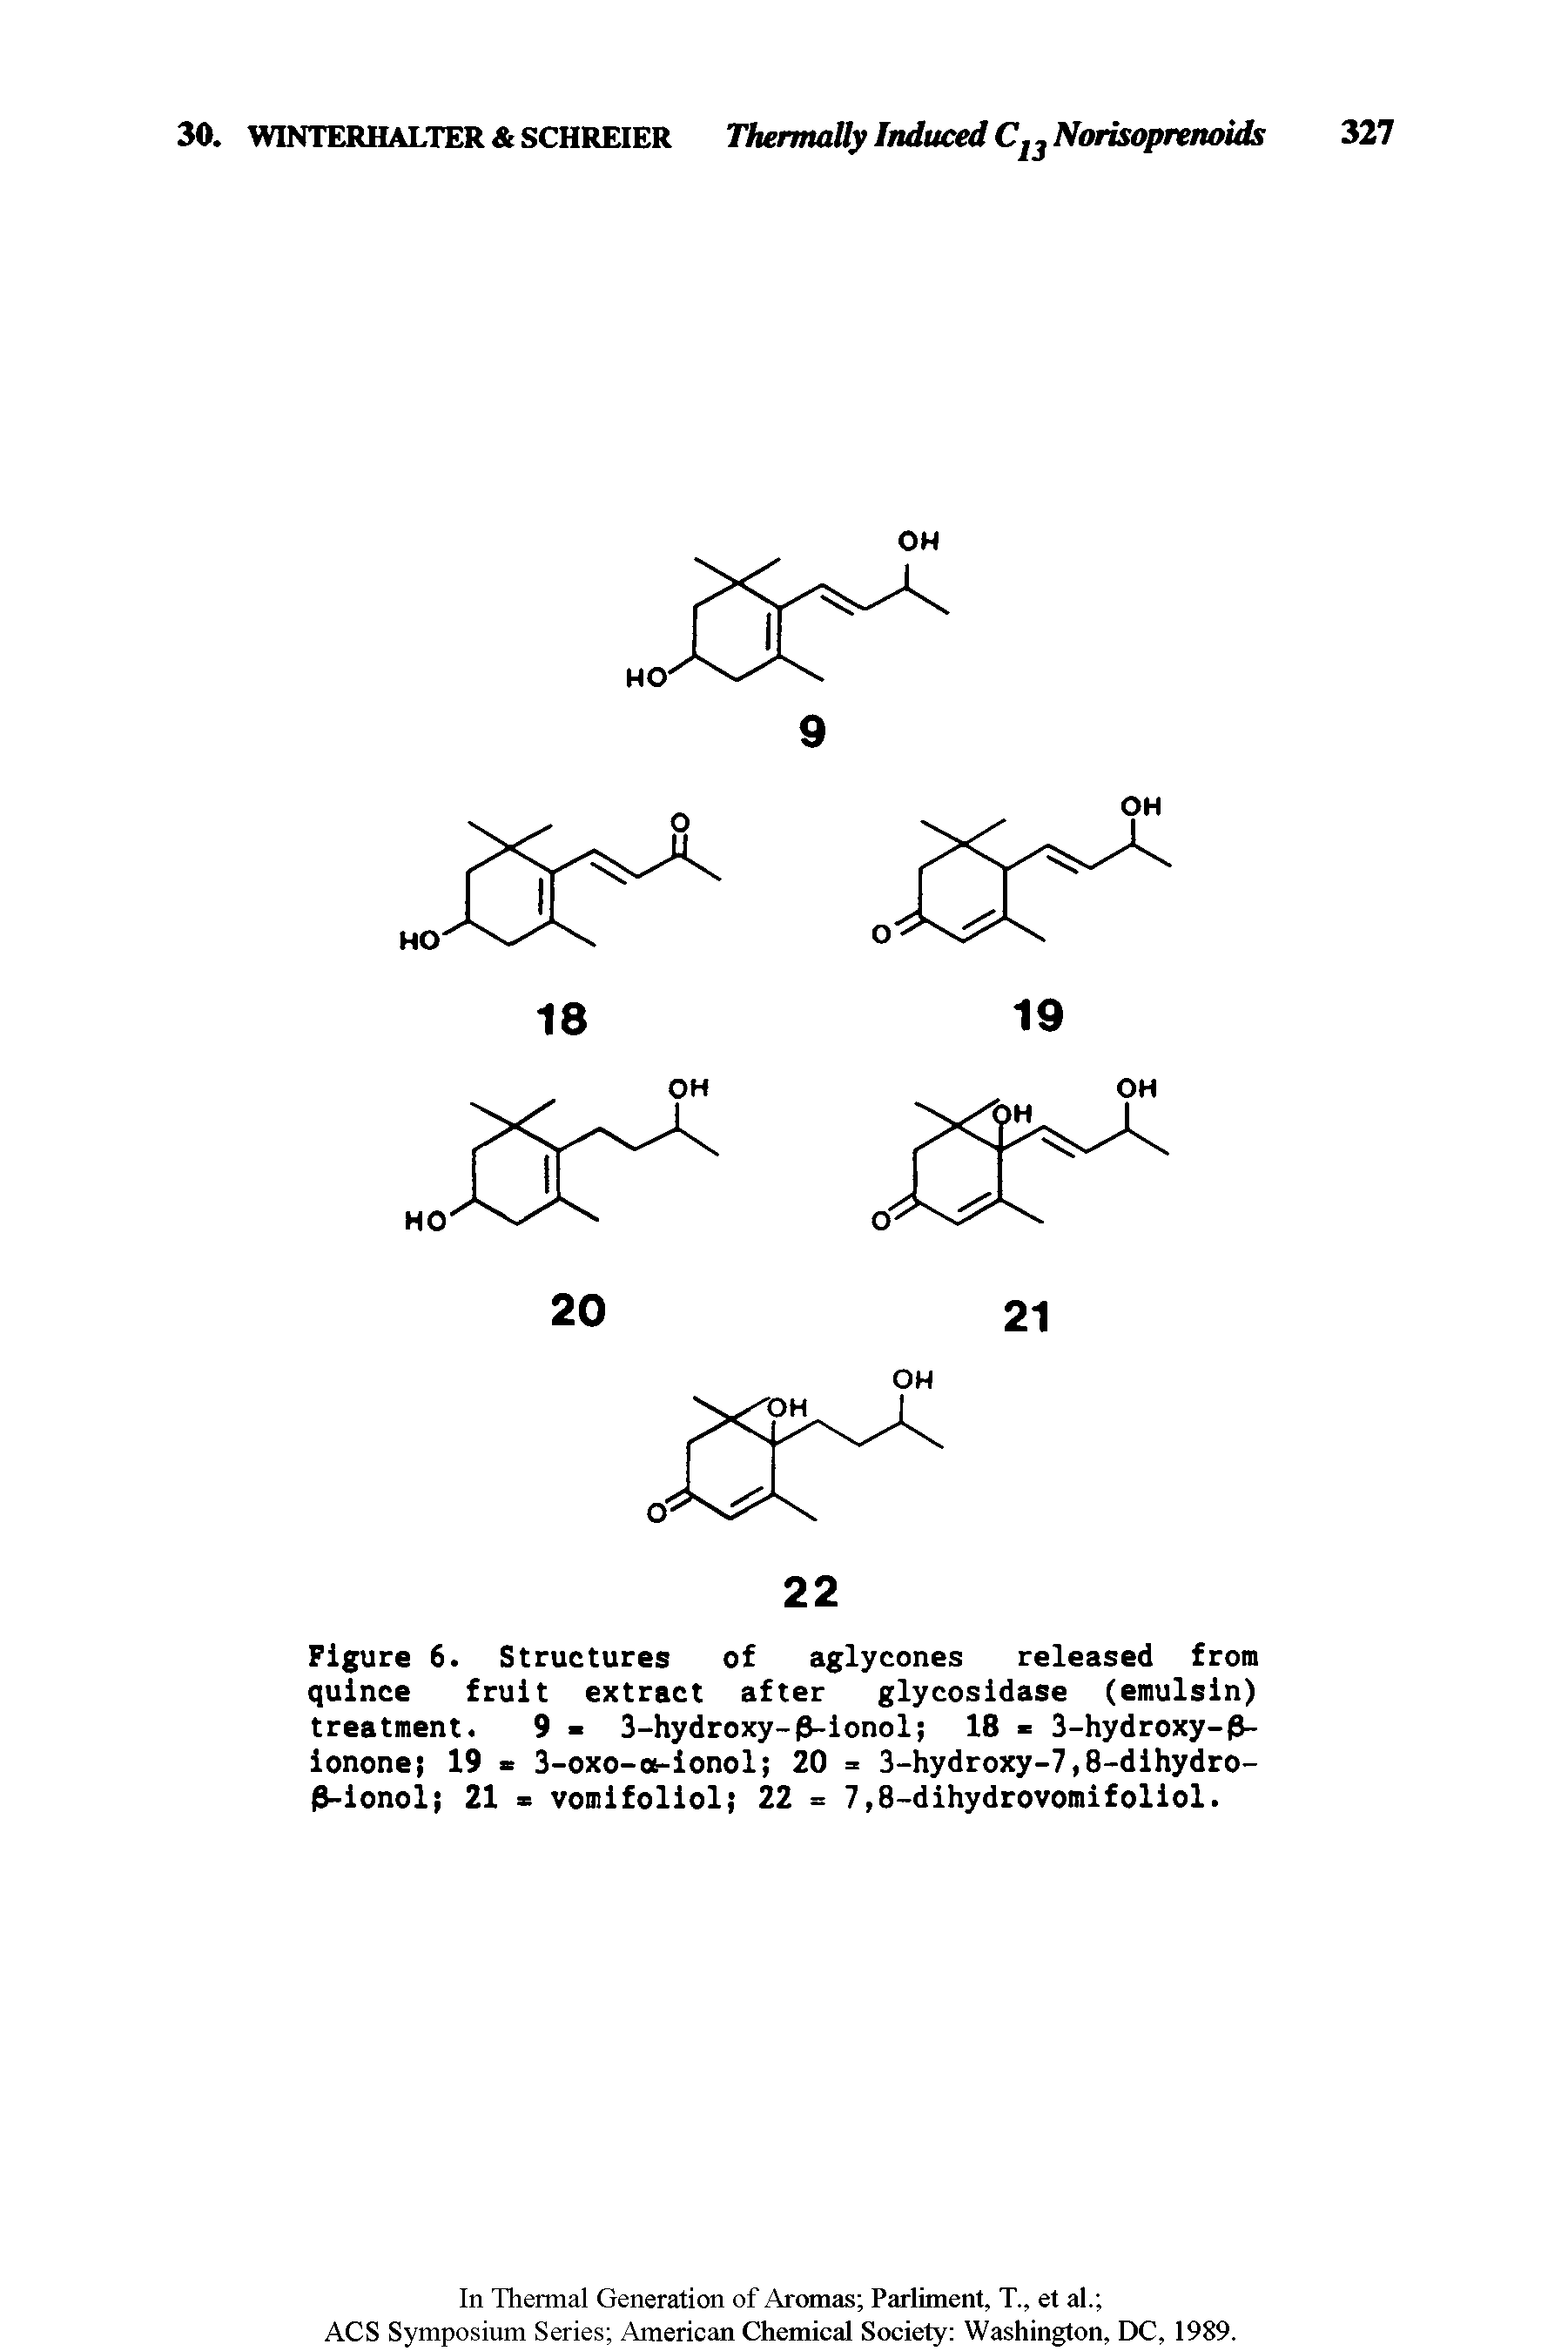 Figure 6. Structures of aglycones released from quince fruit extract after glycosidase (emulsin) treatment. 9 - 3-hydroxy-0-ionol 18 3-hydroxy- 3-ionone 19 > 3-oxo-o-ionol 20 = 3-hydroxy-7,8-dihydro-P-ionol 21 vomifoliol 22 = 7,8-dihydrovomifoliol.